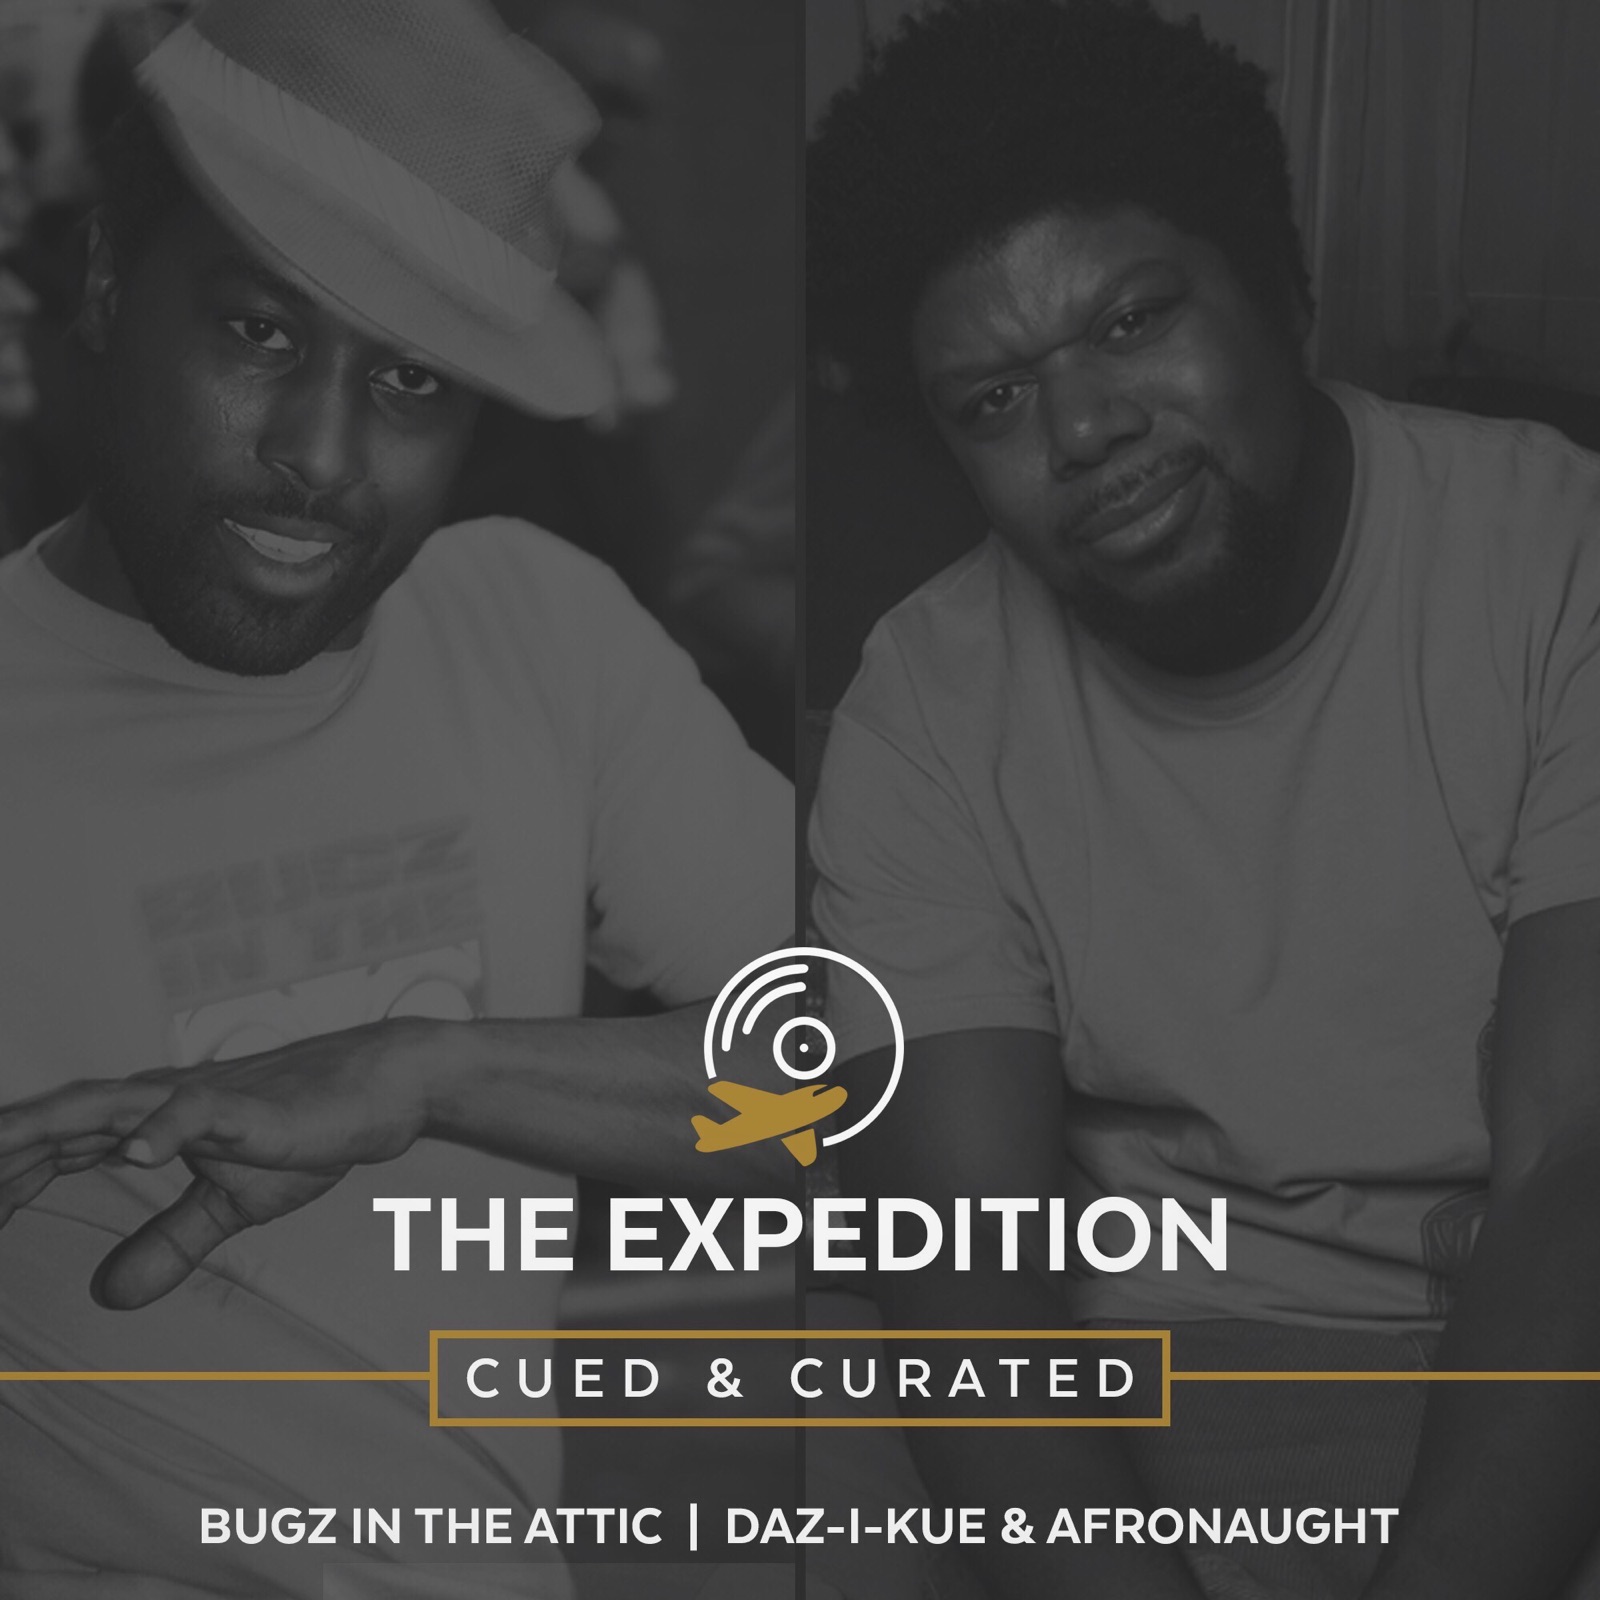 Episode 127: Featuring Special Guests Daz-I-Kue & Afronaught of Bugz In The Attic + Music from Ohmega Watts, Ash, Lauren Faith, Soothsayers, Ruck P + more! 8/24/18